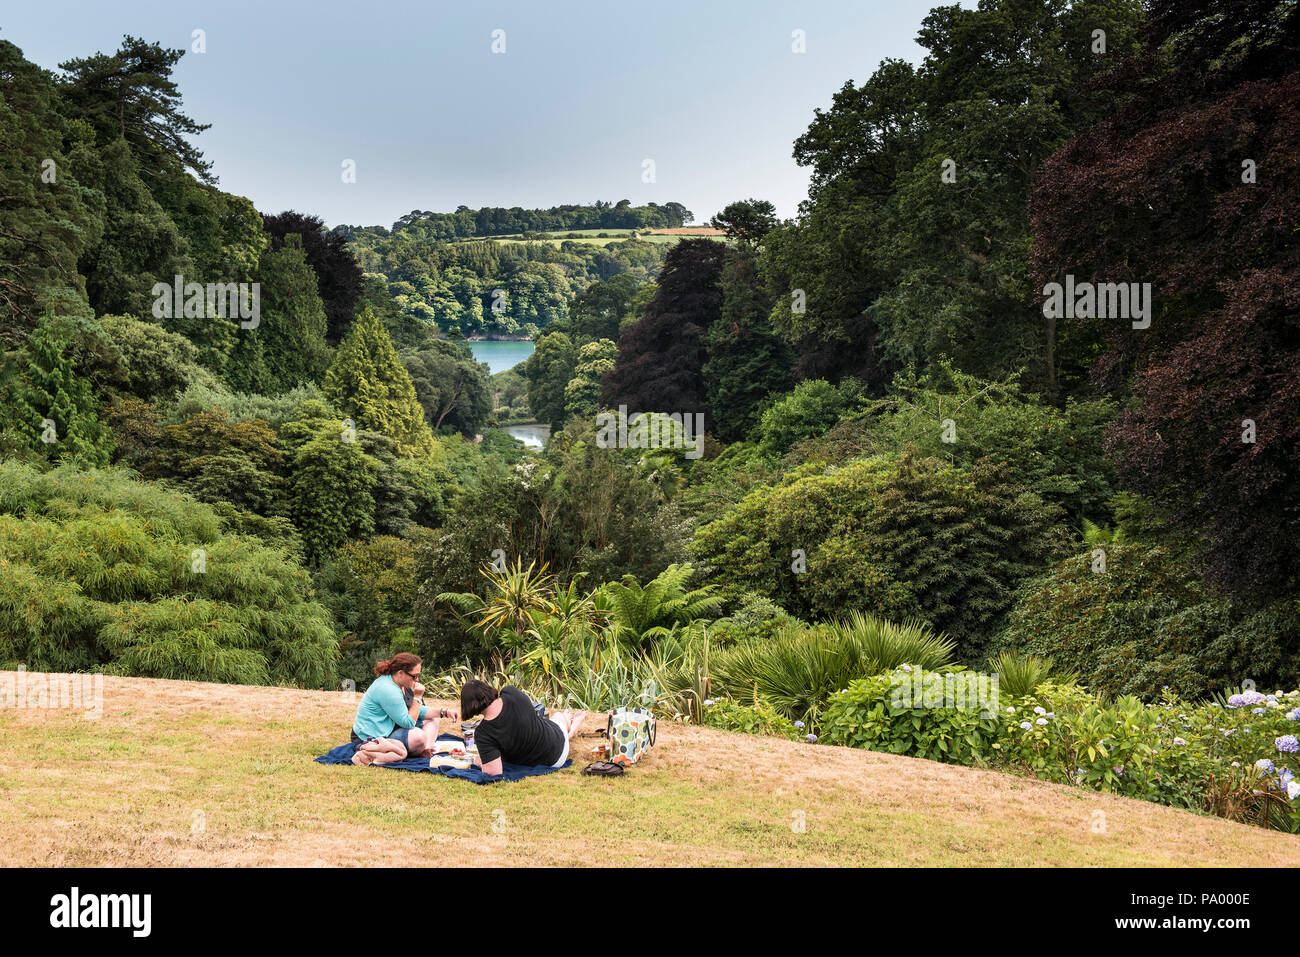 People enjoying a picnic on the lawn at Trebah Garden in Cornwall. Stock Photo